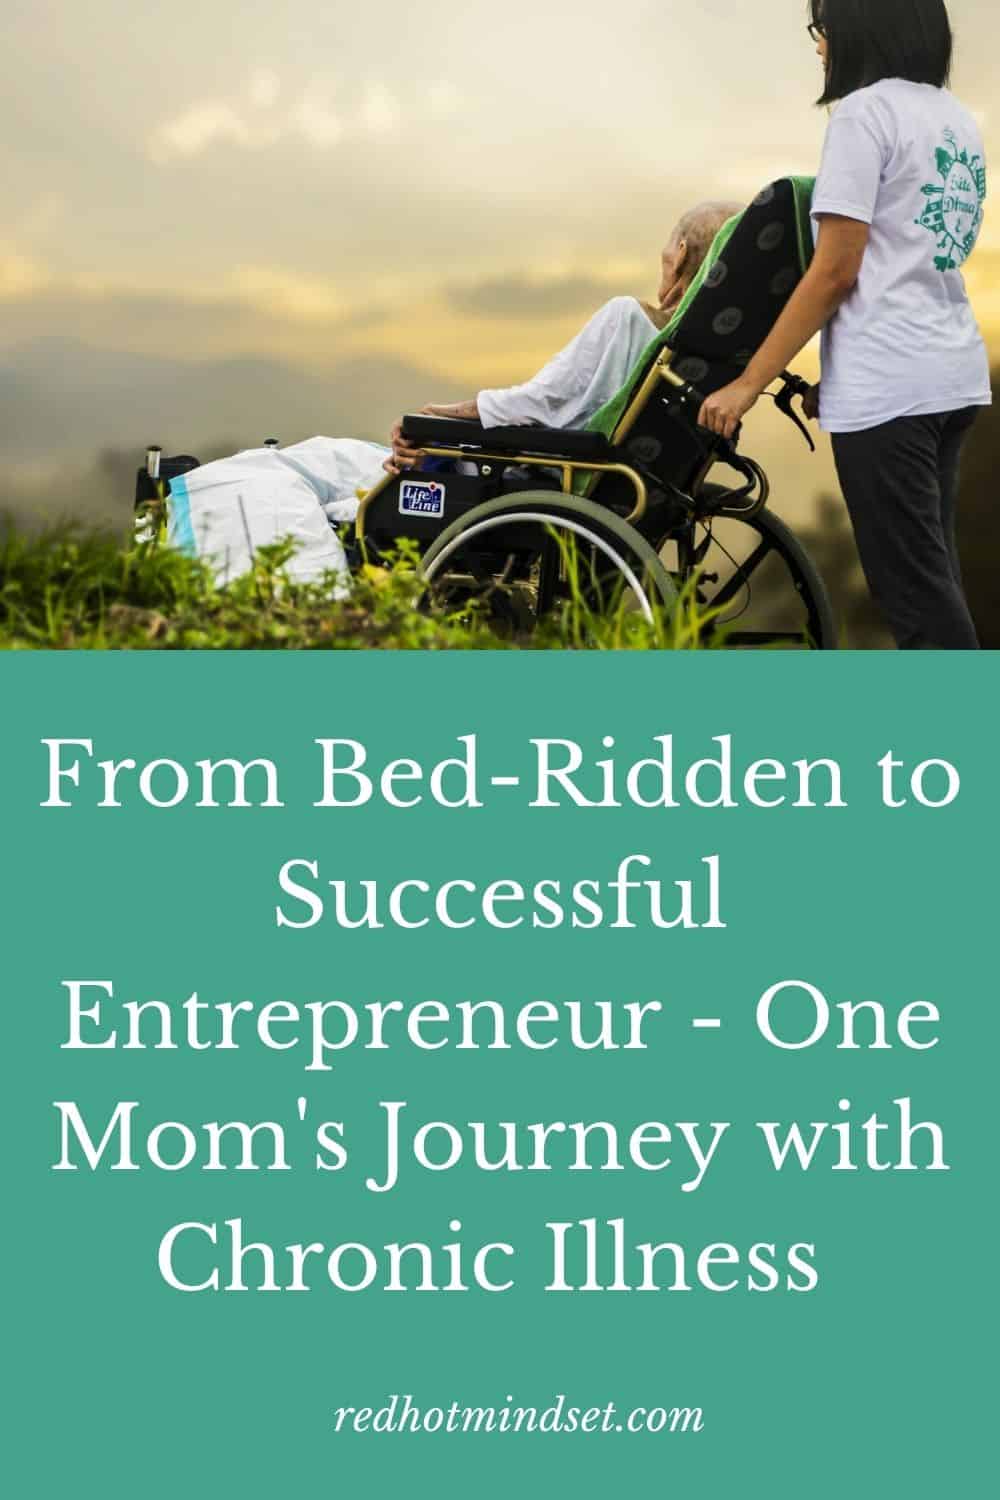 Ep 121 | But God! From Bed-Ridden to Successful Entrepreneur – One Mom’s 7-Year Journey Fighting a Painful and Chronic Illness